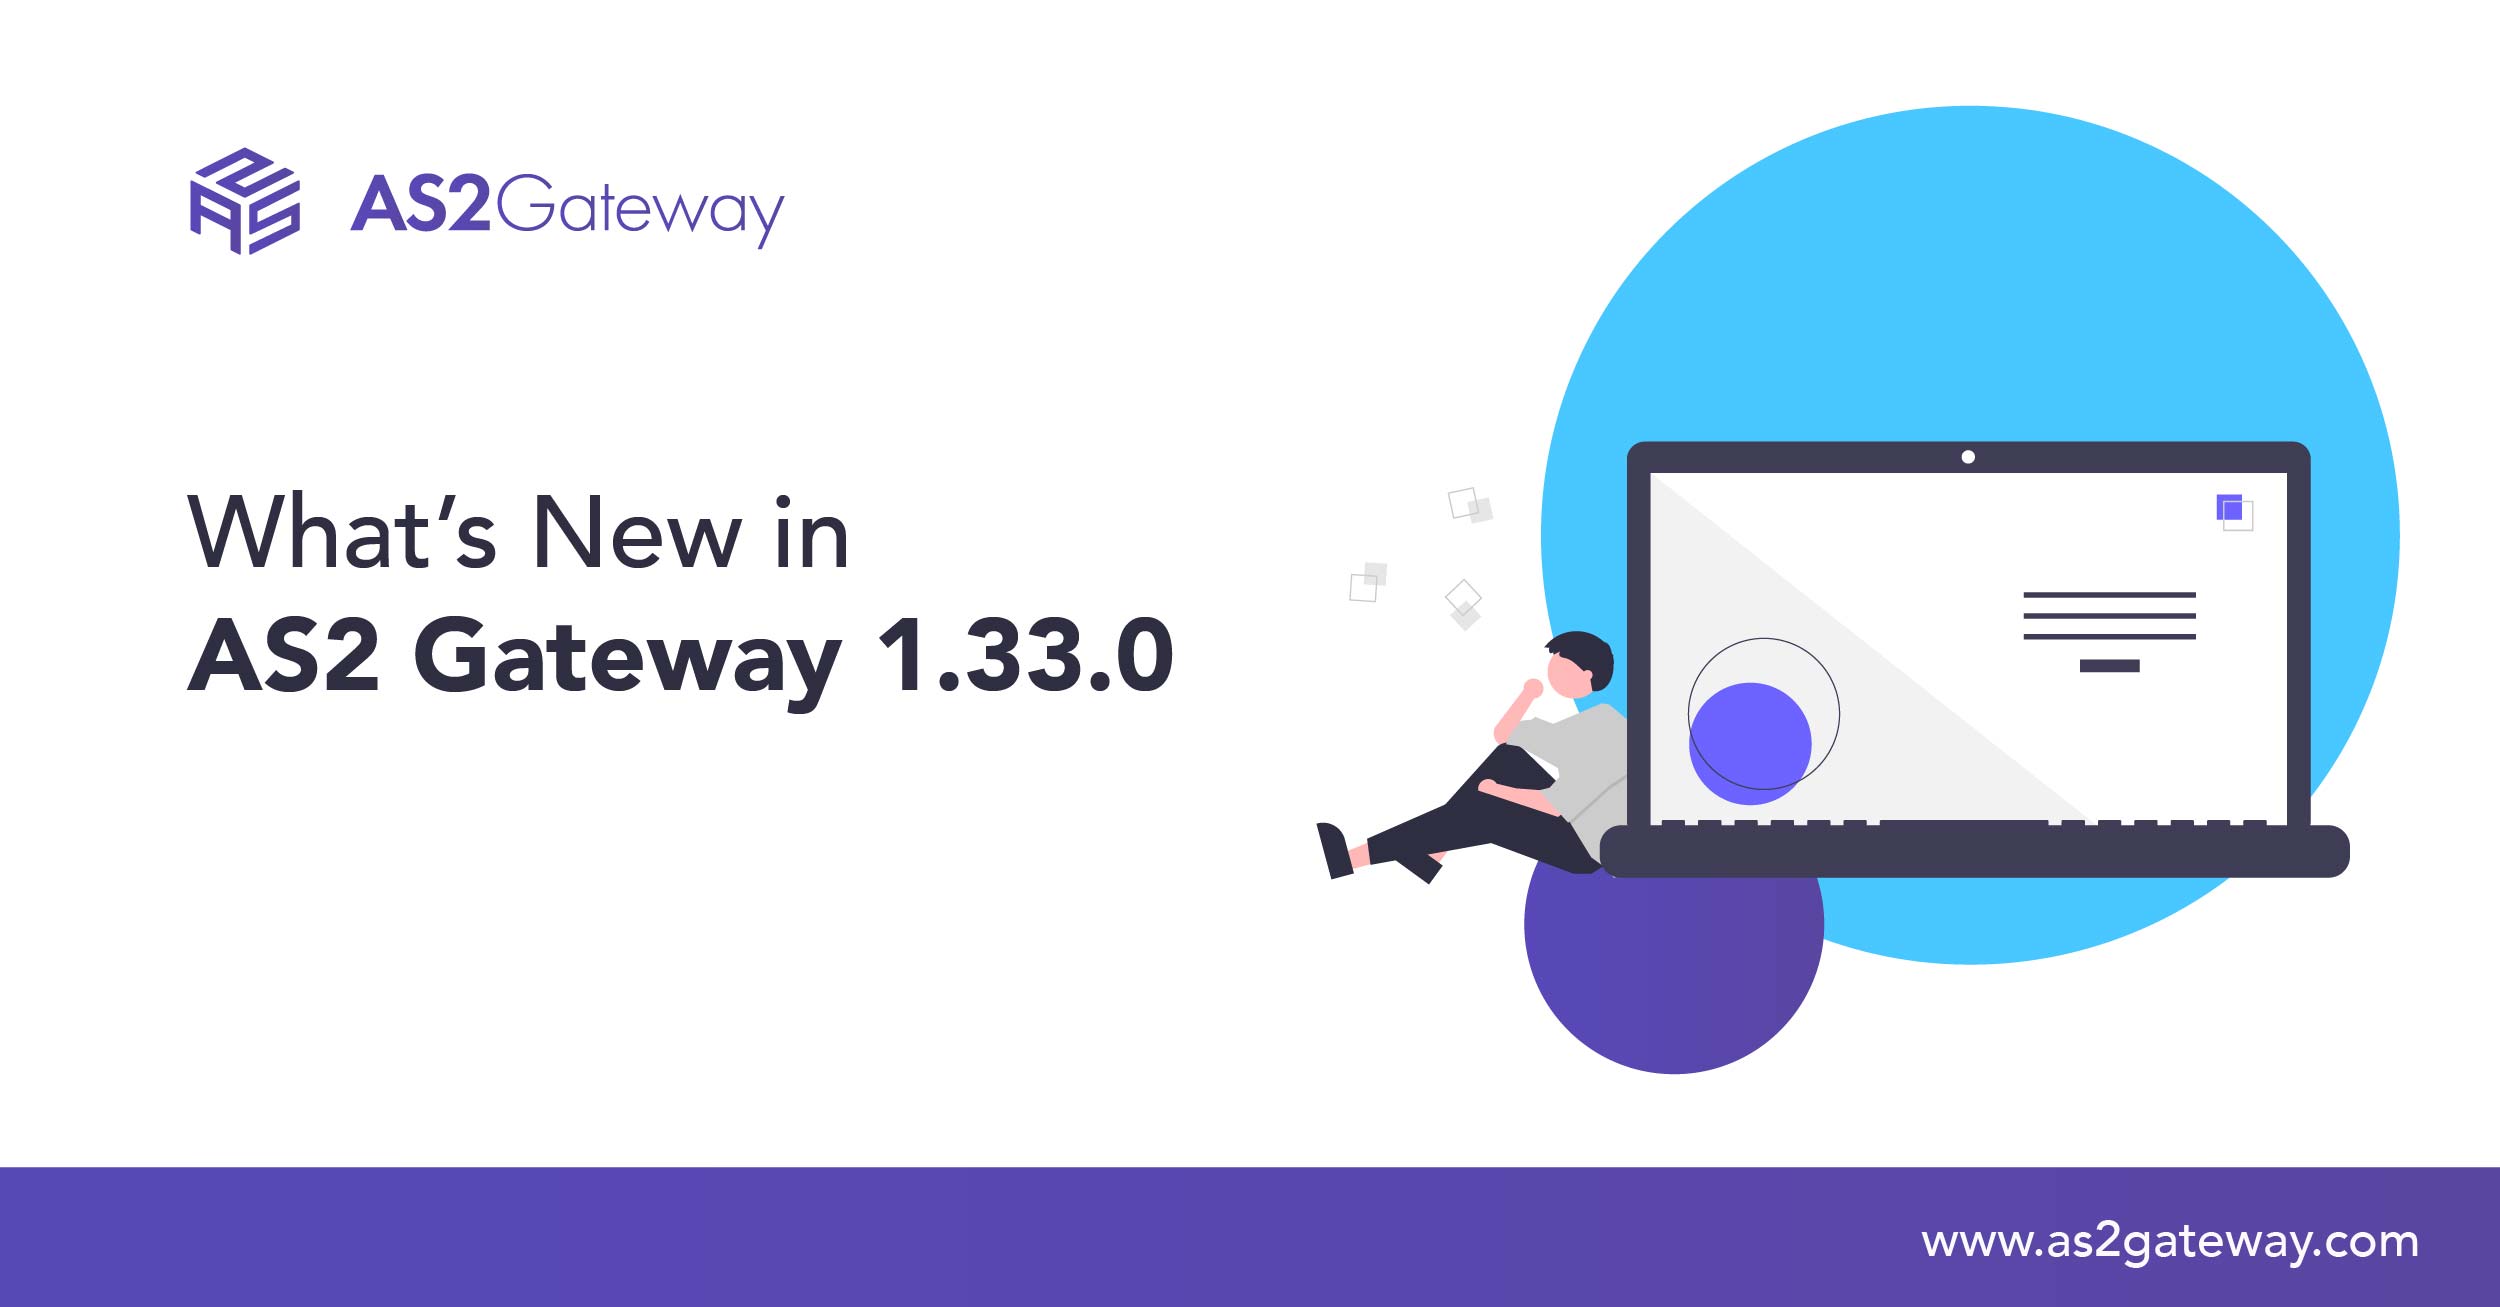 What’s New in AS2 Gateway 1.33.0